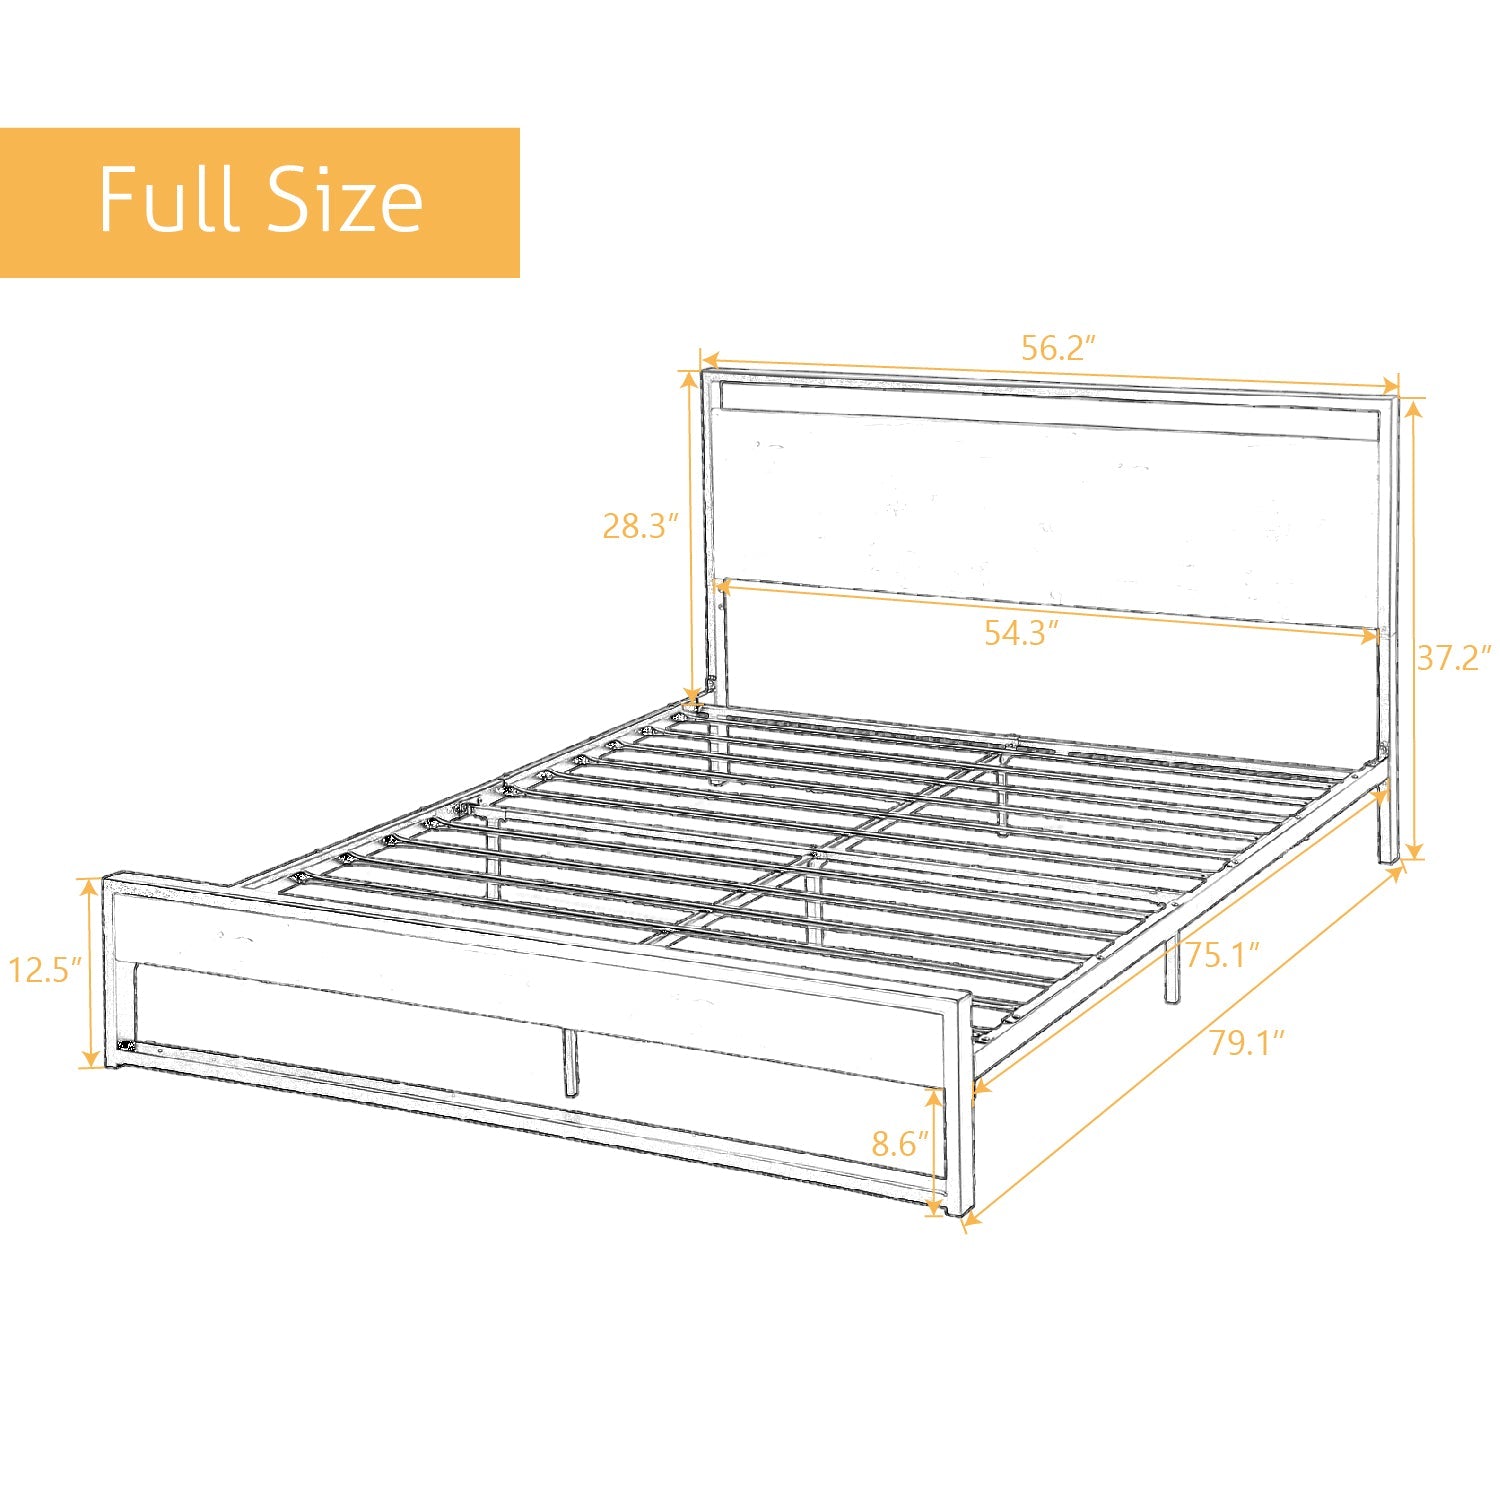 Amolife Full Platform Bed Frame with Wooden Headboard and 13 Strong Steel Slats Support, Dark Brown